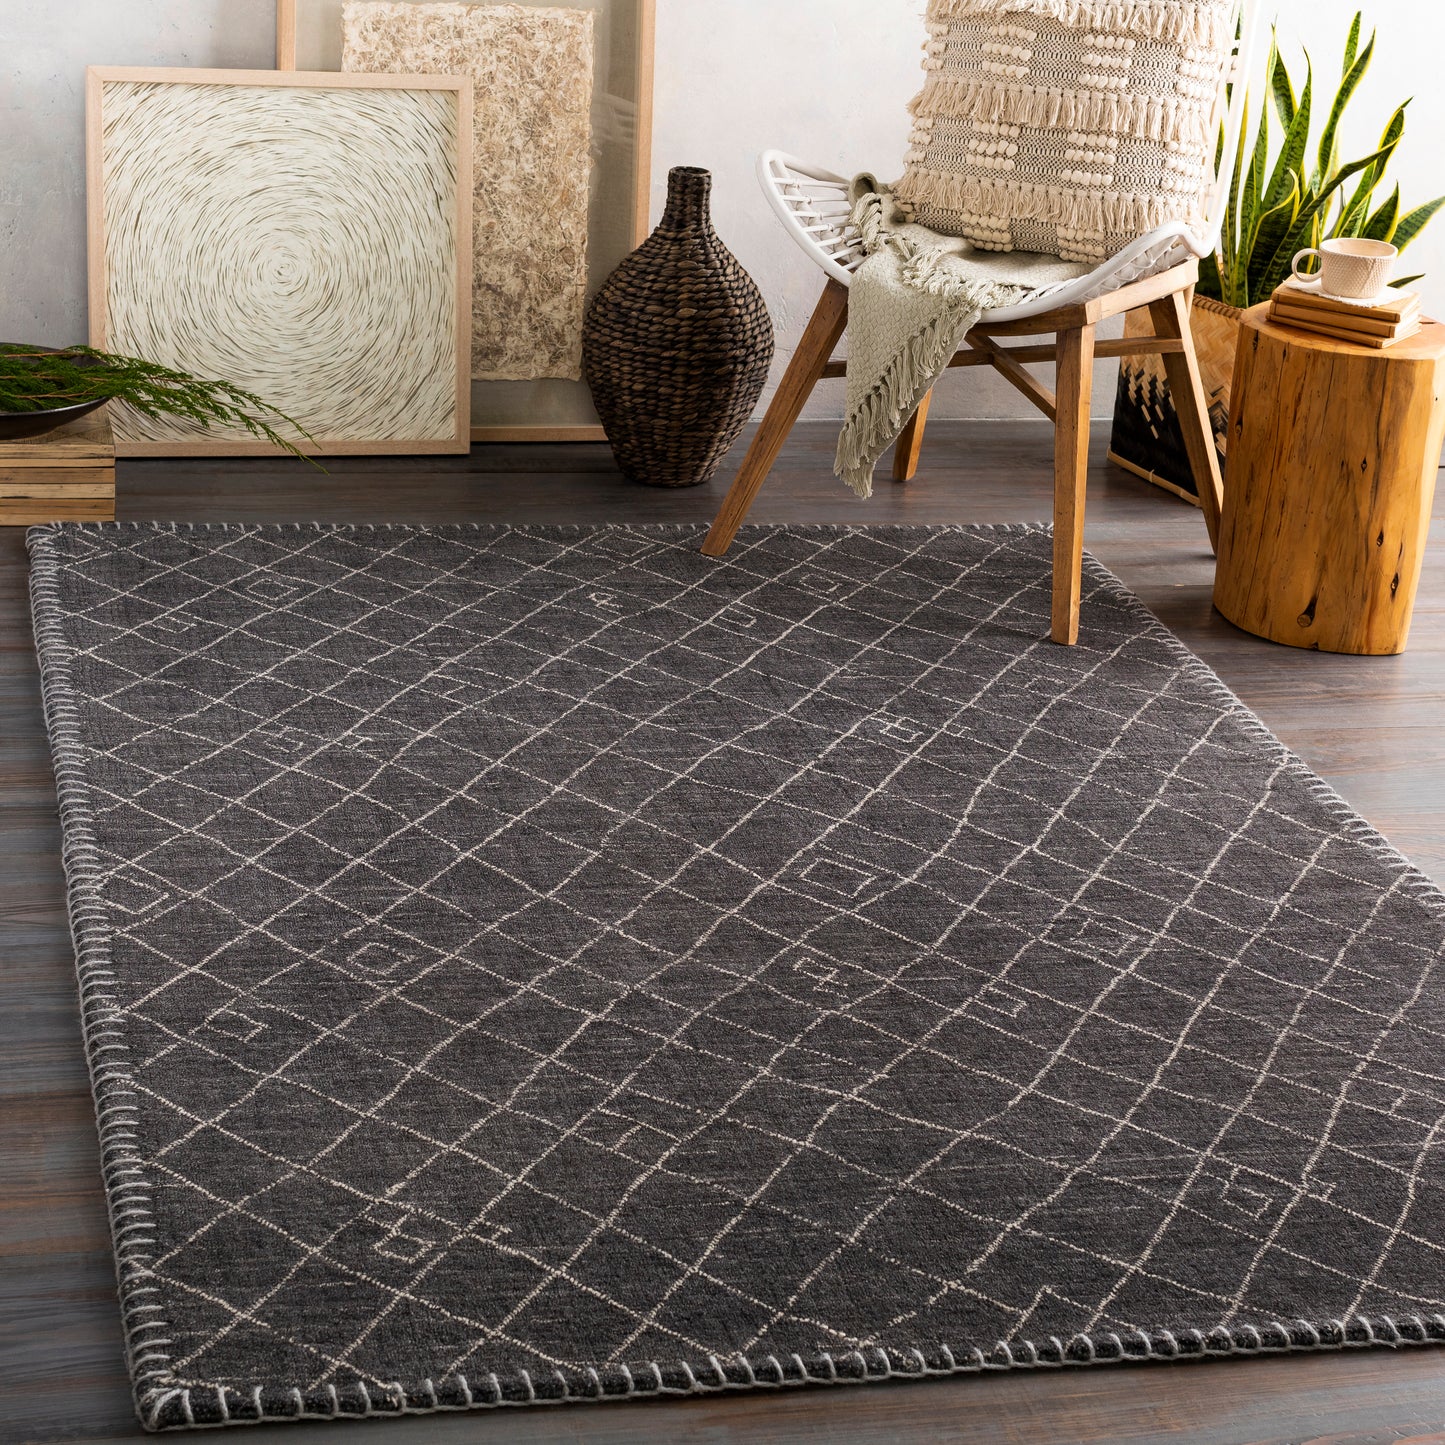 Arlequin 30026 Hand Knotted Wool Indoor Area Rug by Surya Rugs